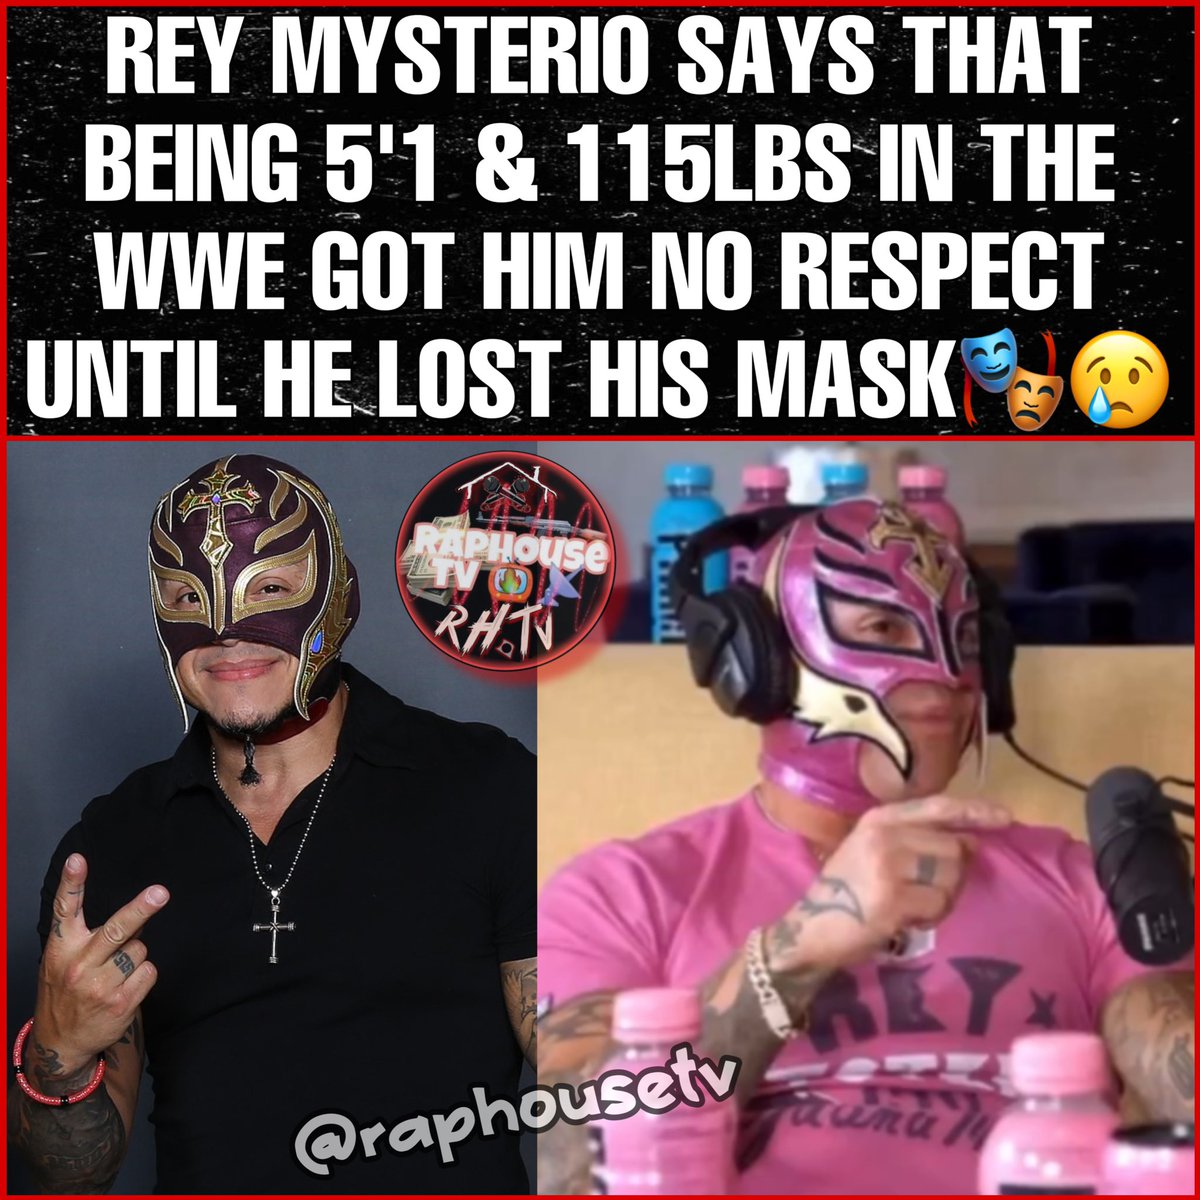 Rey Mysterio Says that Being 5’1 & 115 Lbs in the WWE got him no Respect until he lost his Mask🎭😢